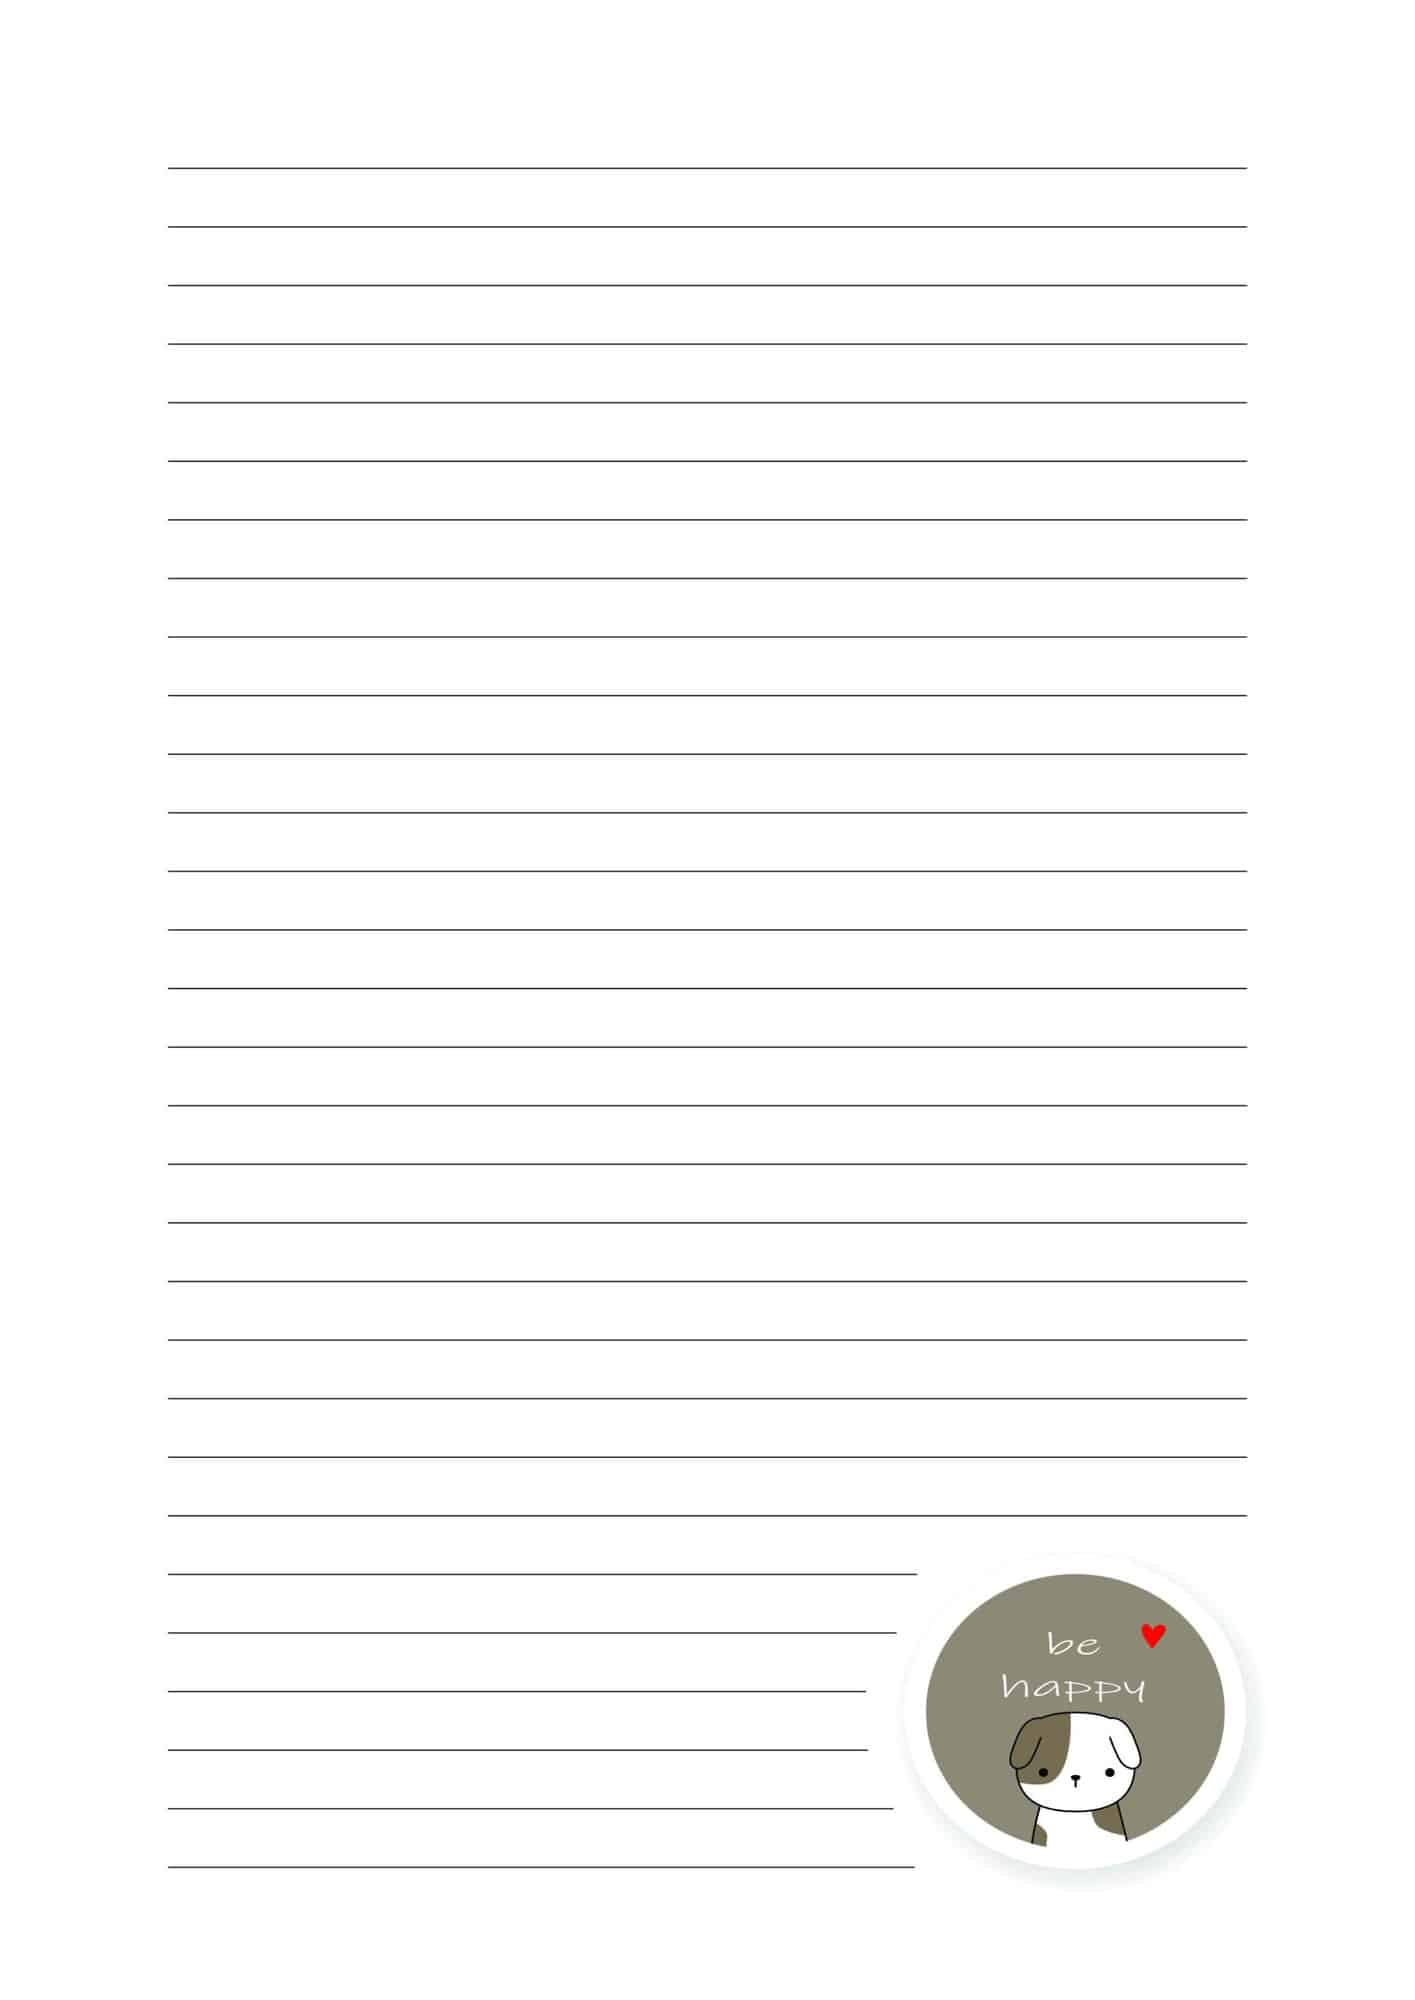 Lined paper template with dog images.